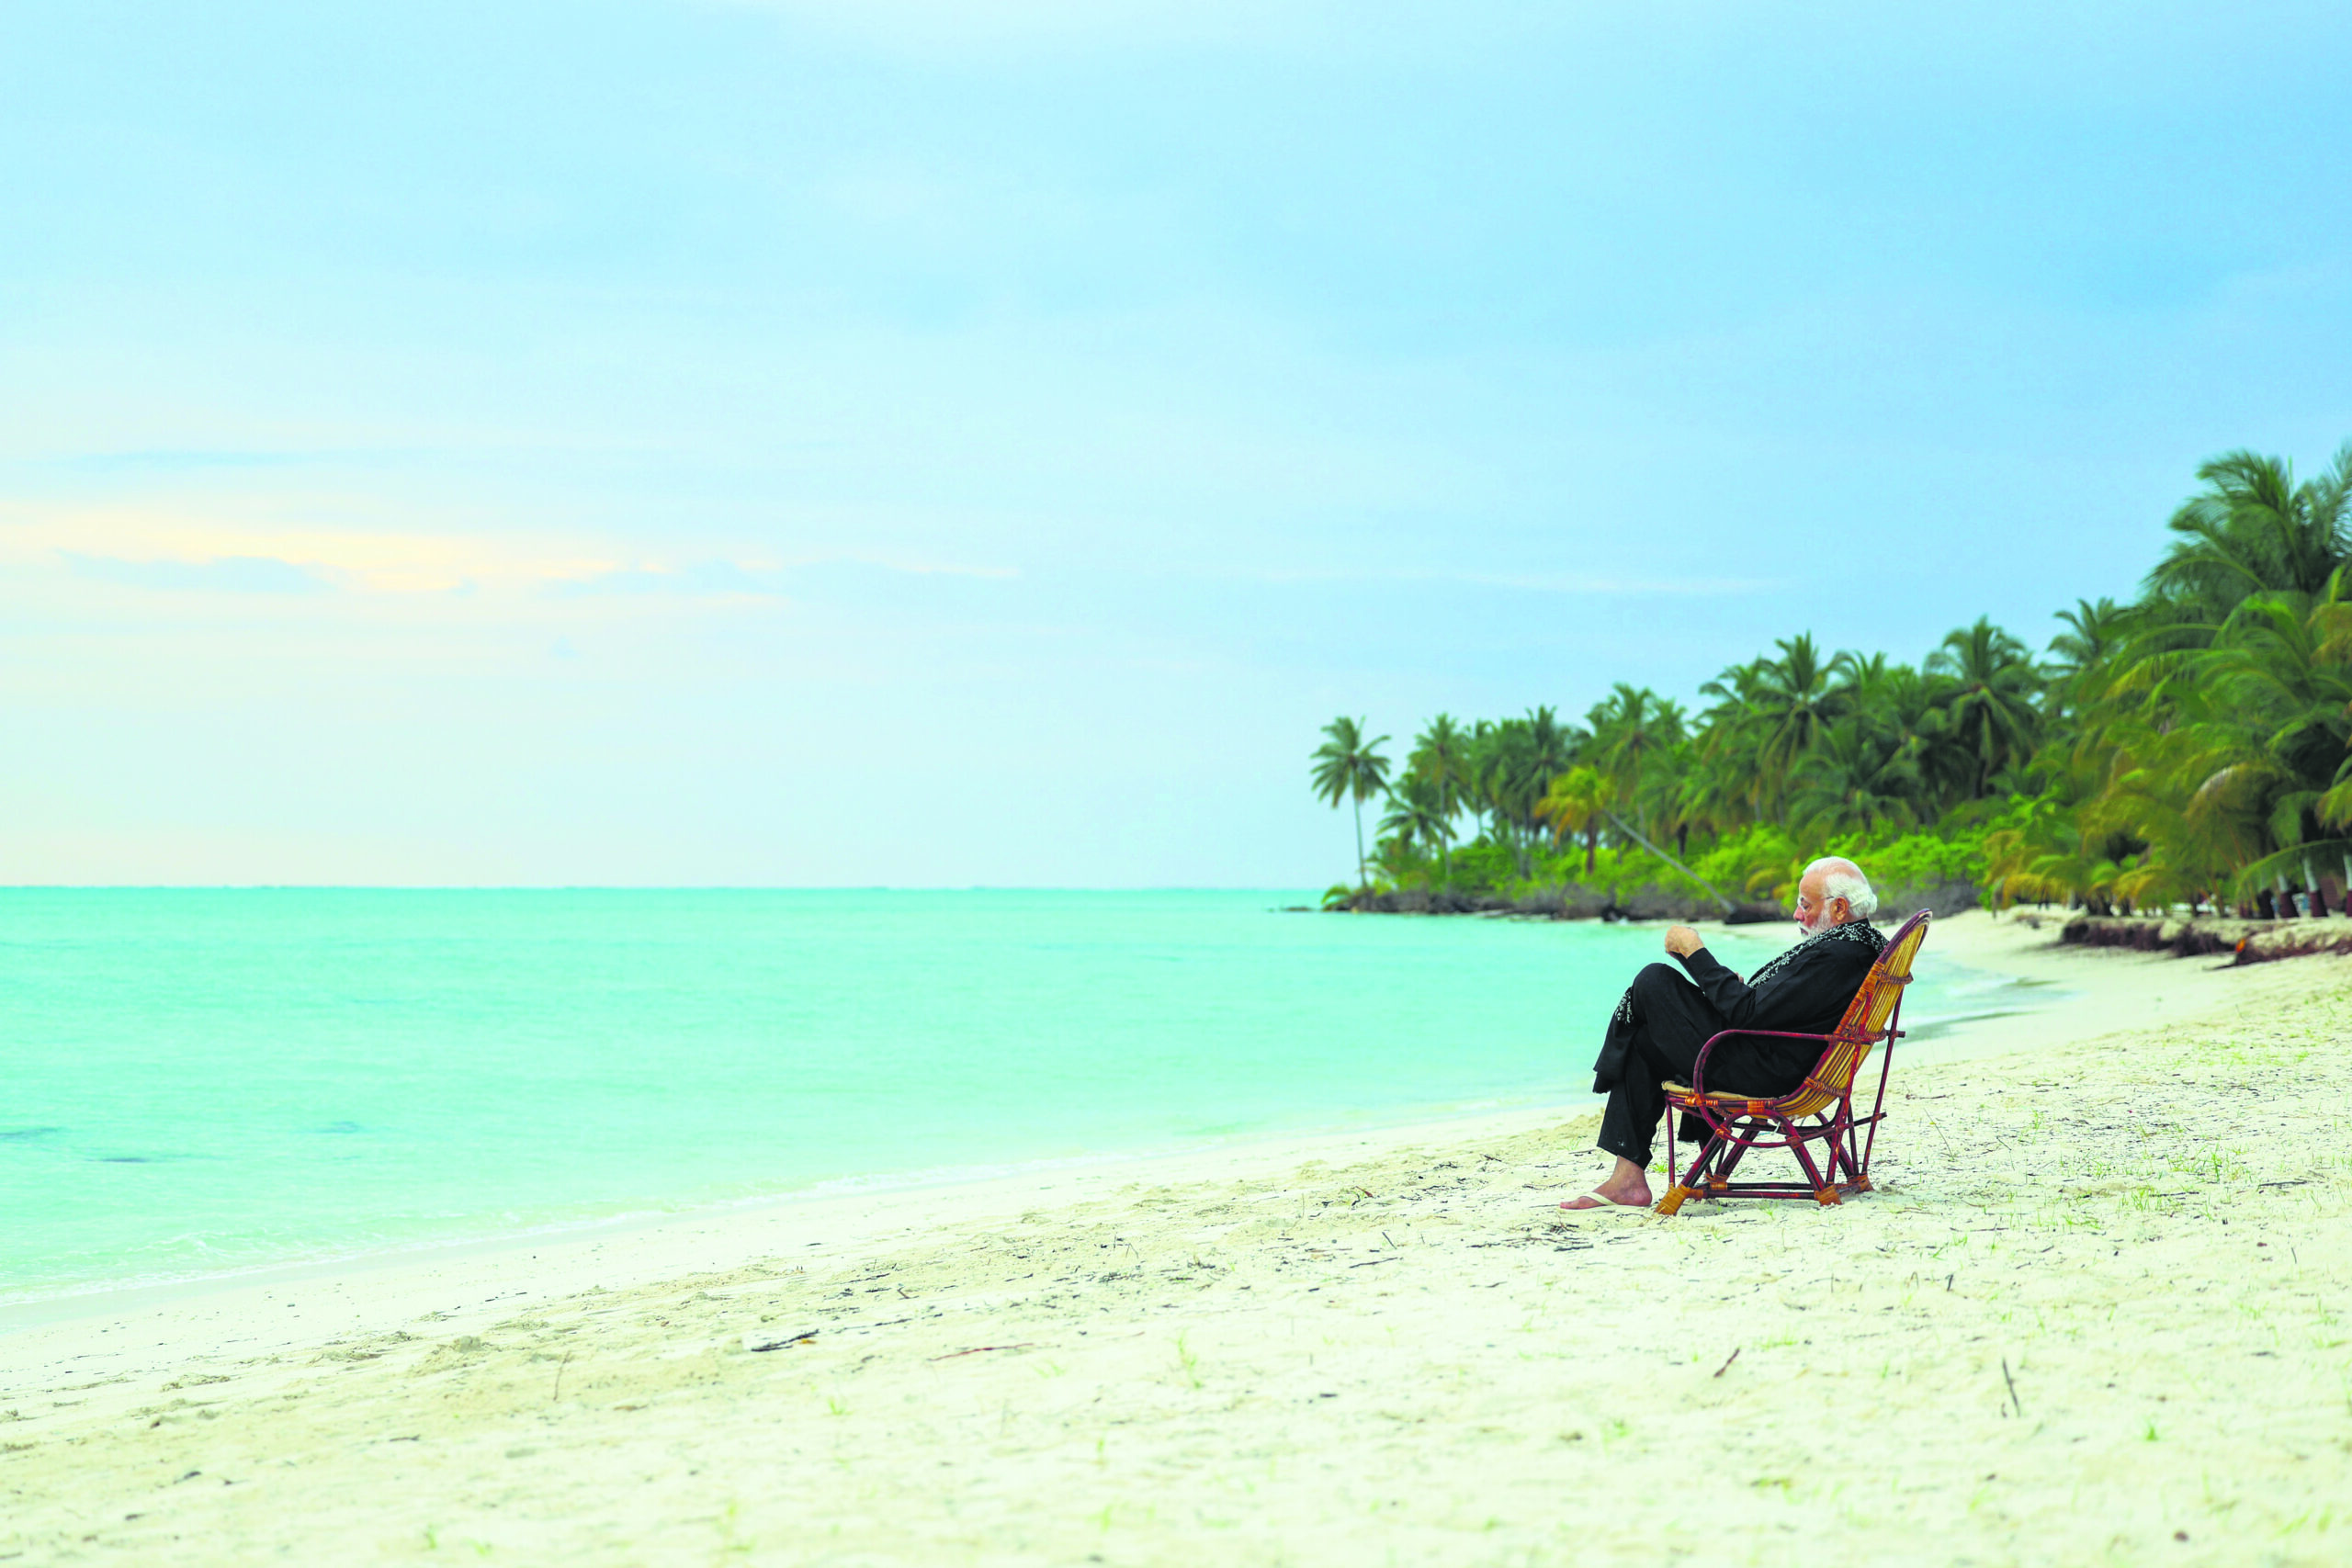 Lakshadweep 7 Days Tour Packages, 7 Days and 6 Nights Holiday Itinerary